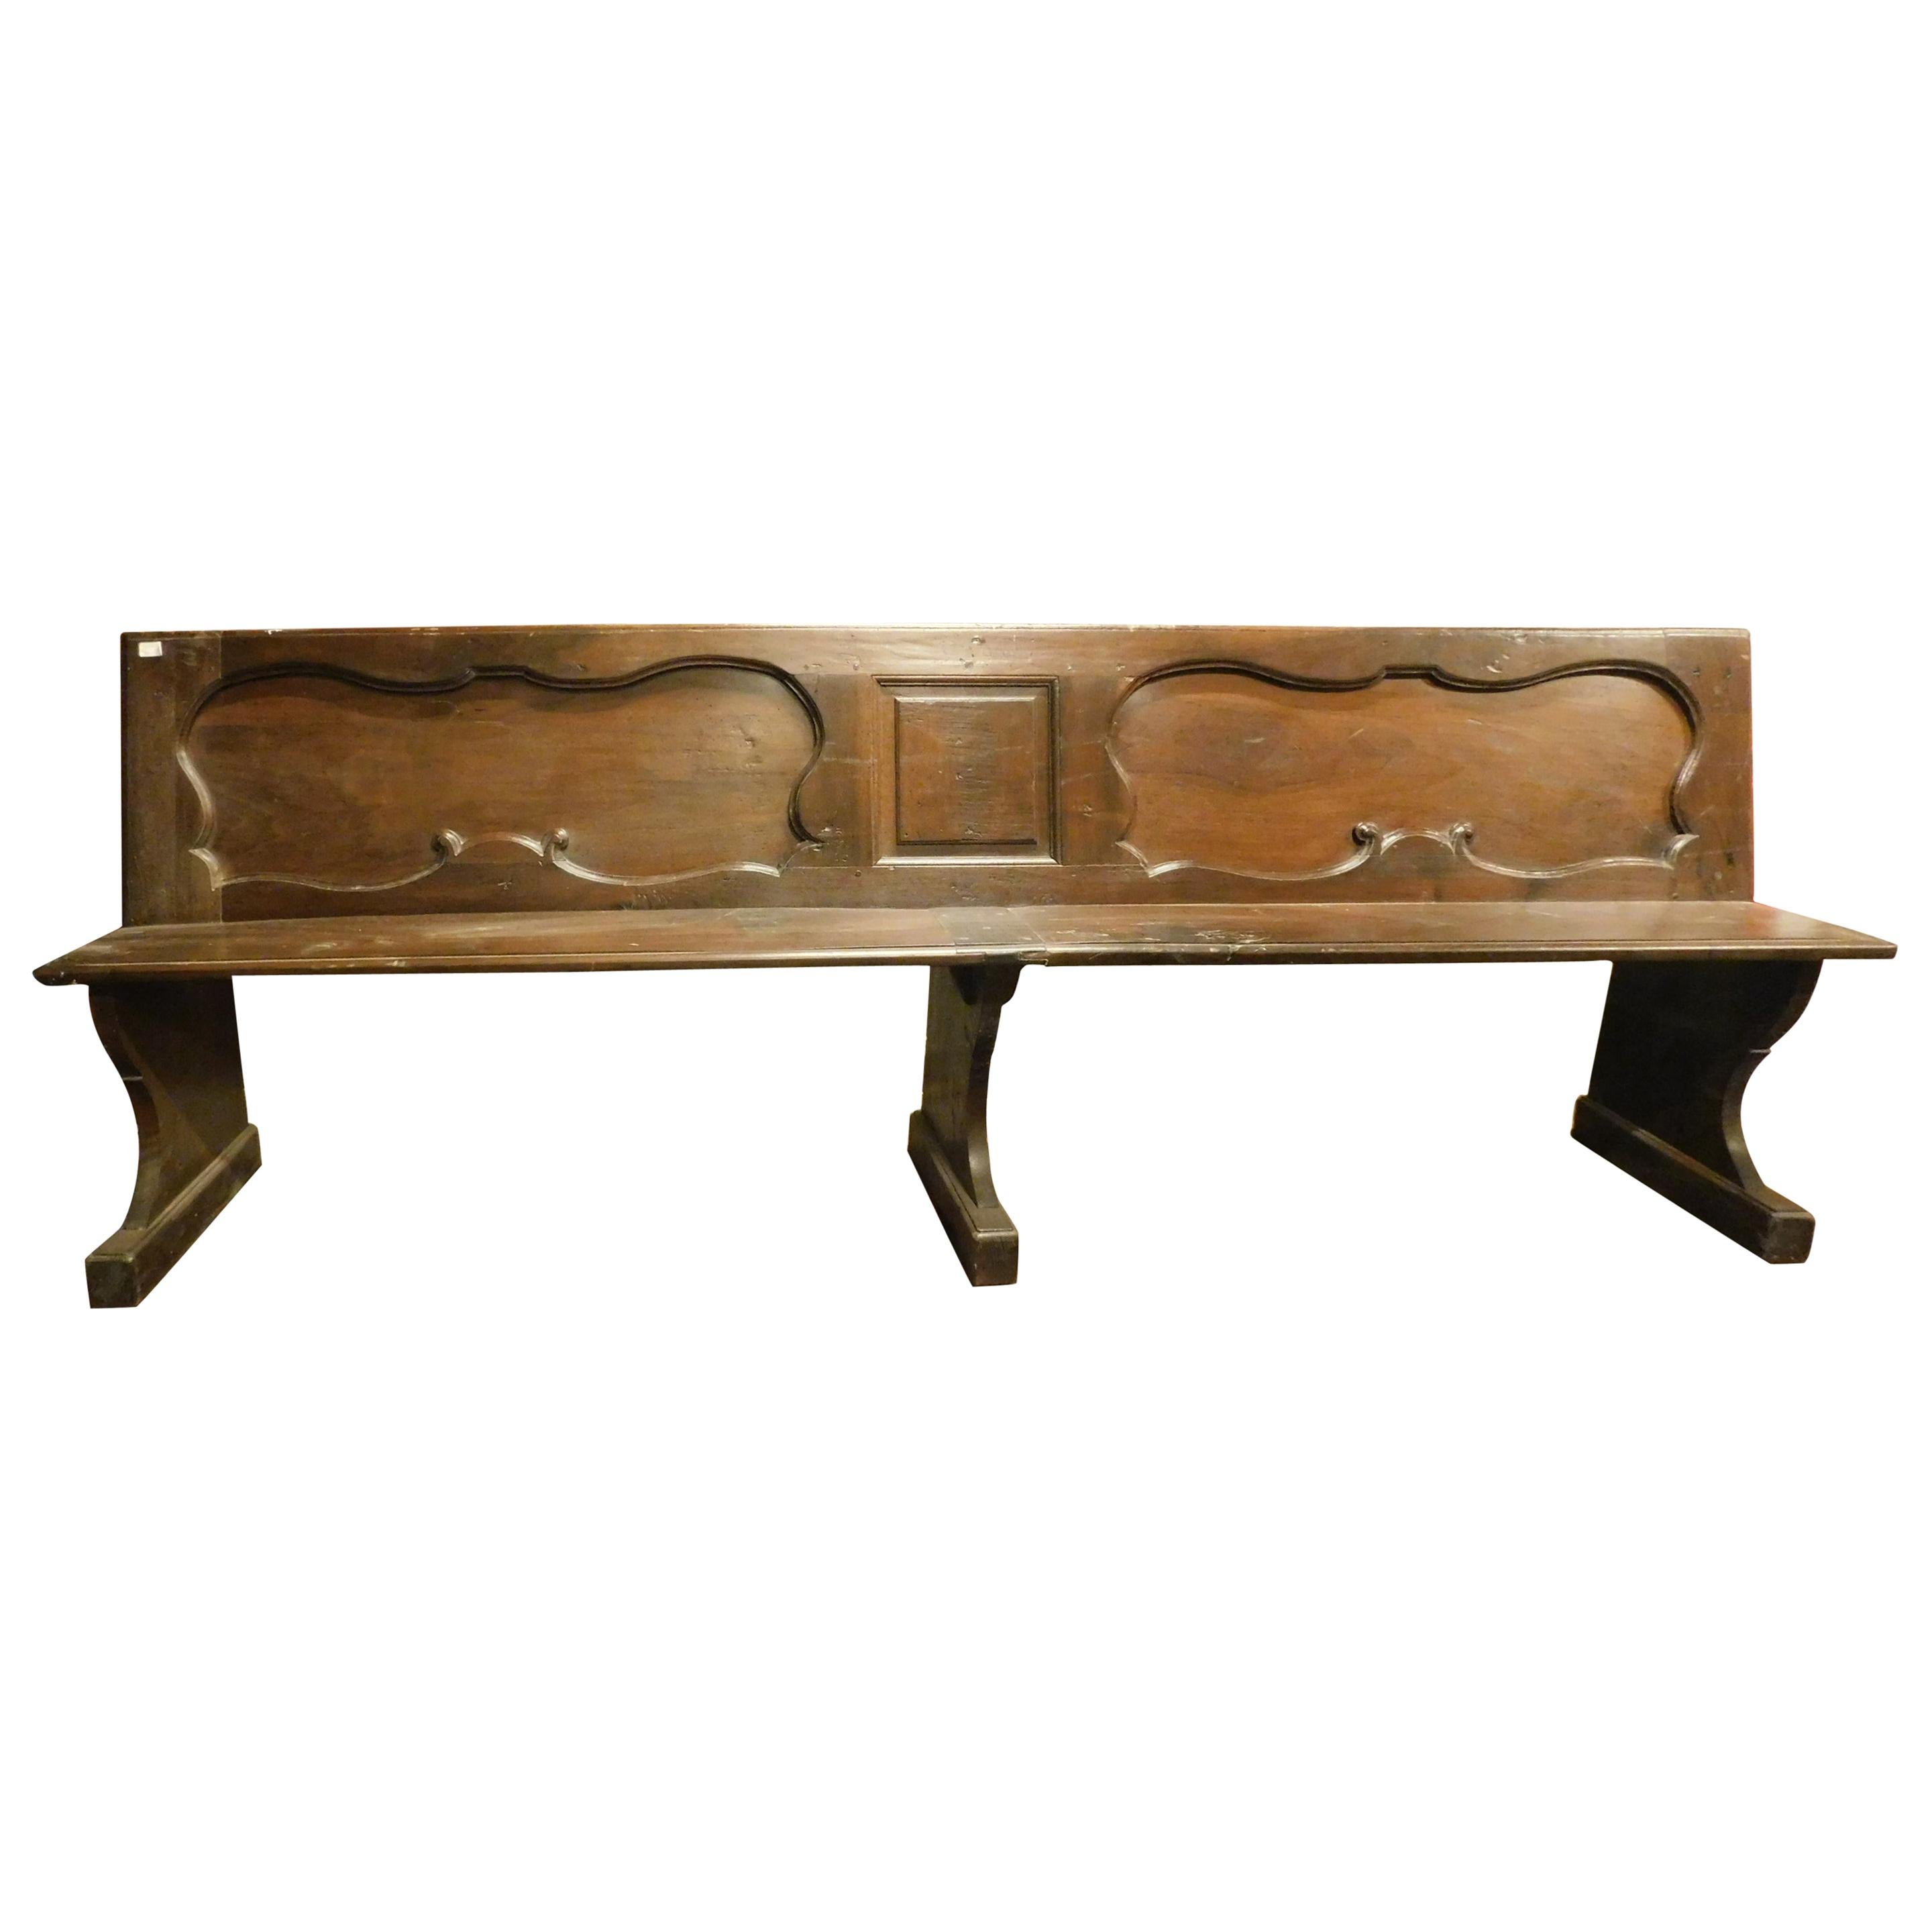 Antique Walnut Bench, Carved Panels, 18th Century, Italy For Sale